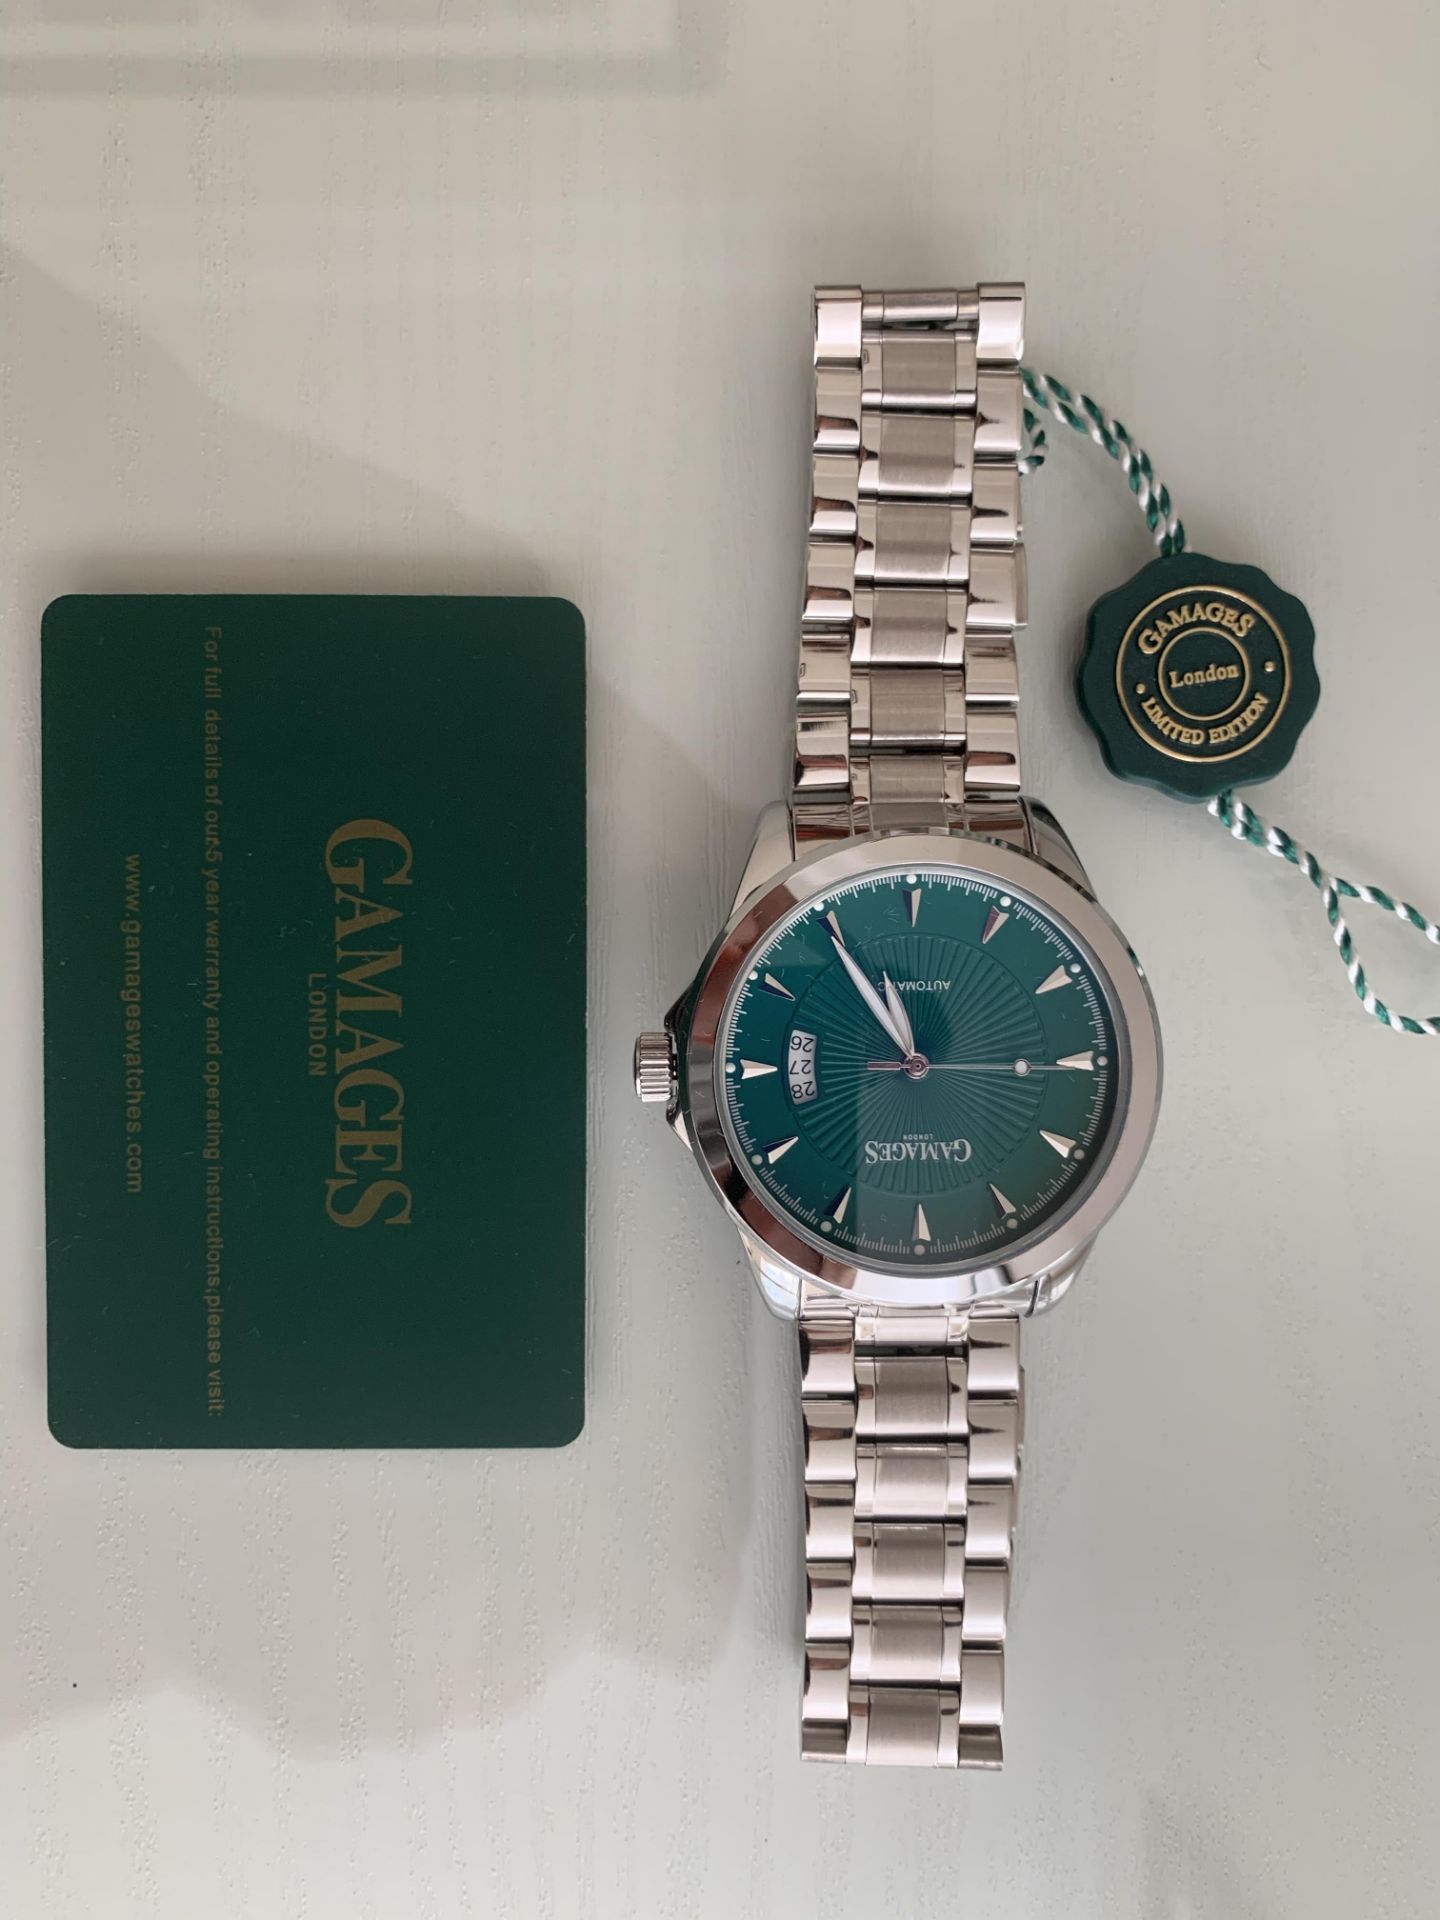 Limited Edition Hand Assembled GAMAGES Open Date Automatic Emerald – 5 Year Warranty & Free Delivery - Image 7 of 10